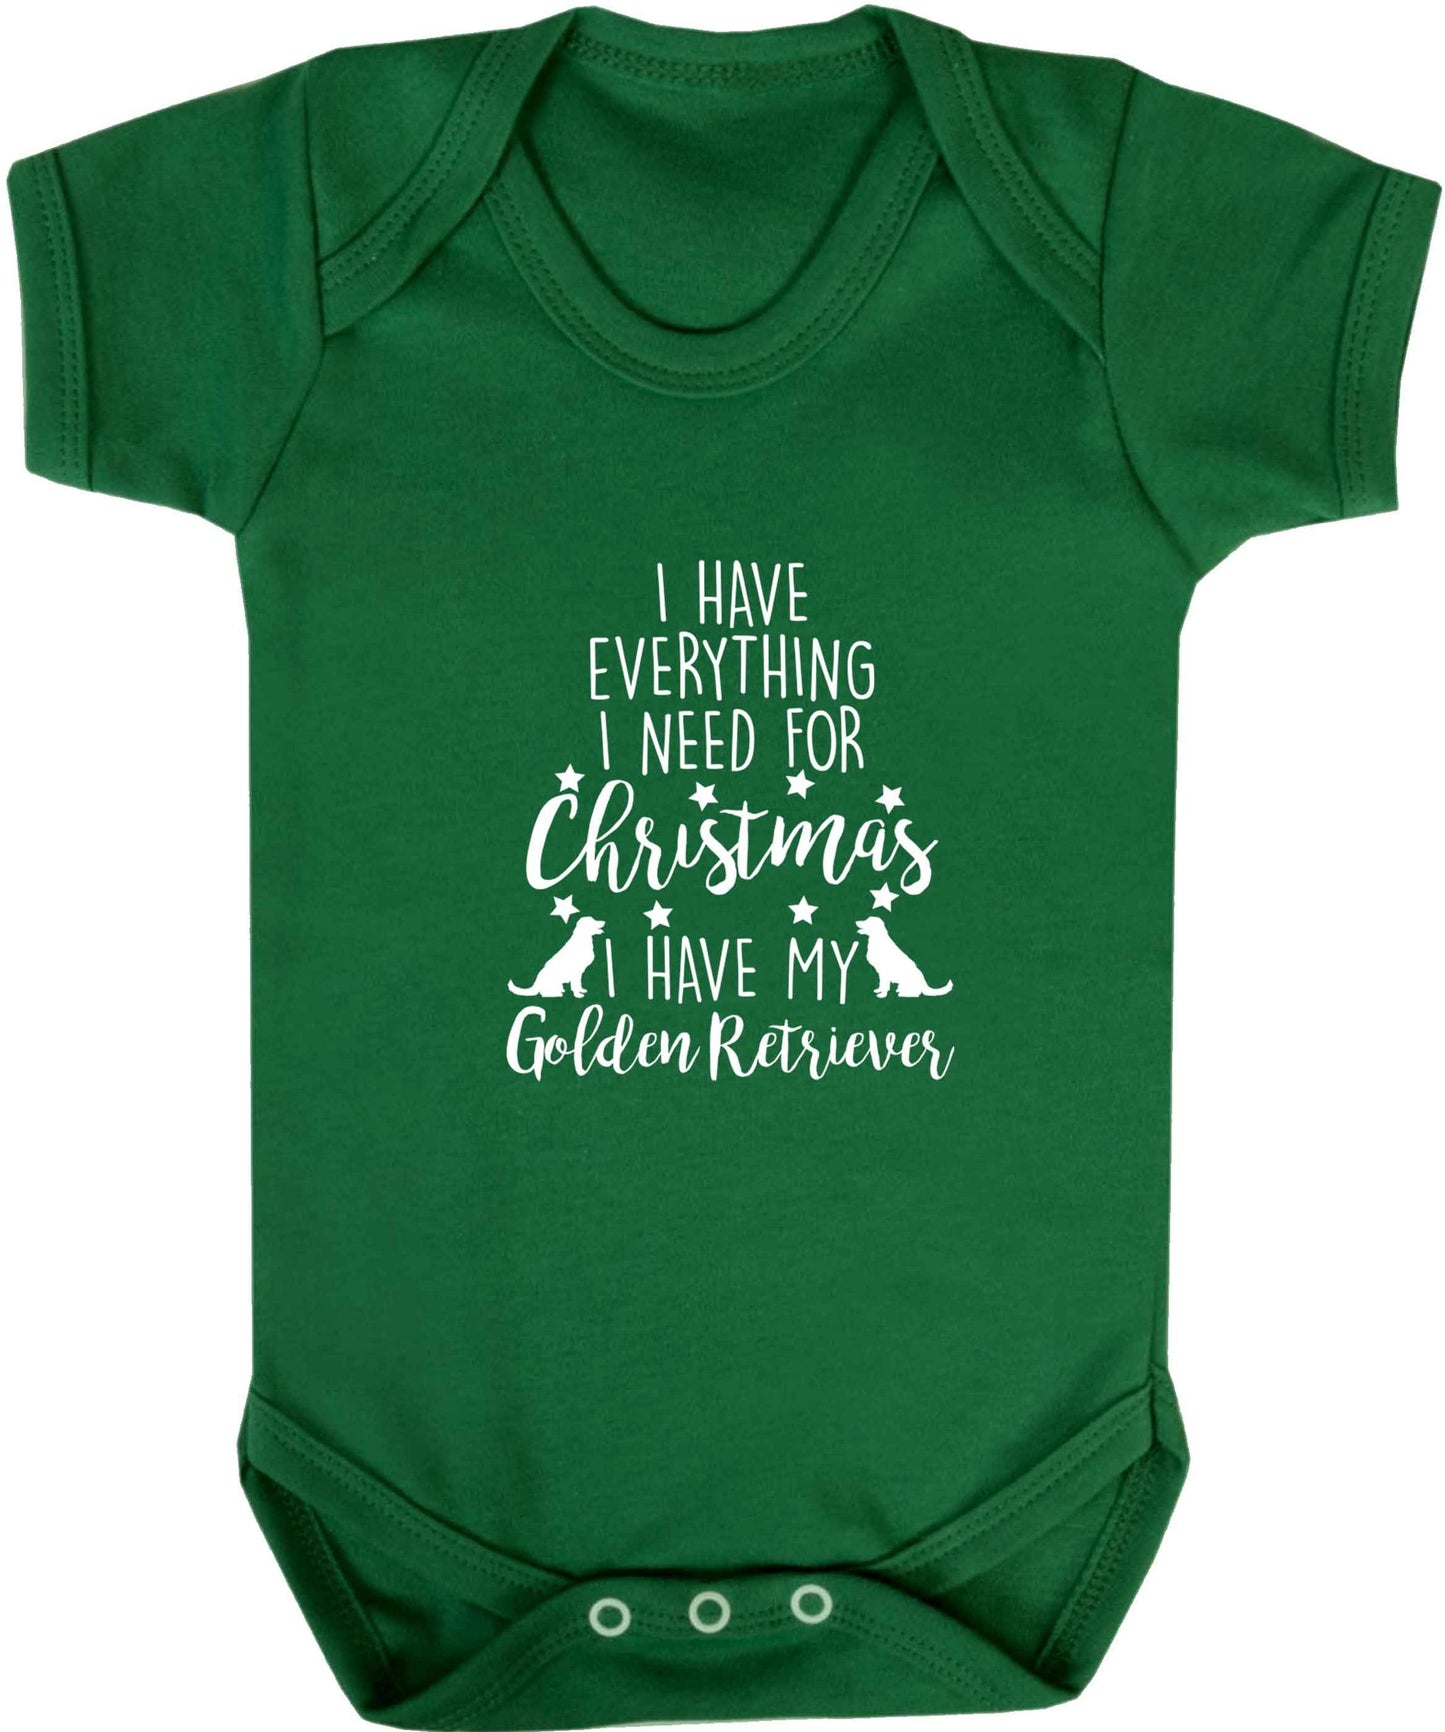 I have everything I need for Christmas I have my golden retriever baby vest green 18-24 months